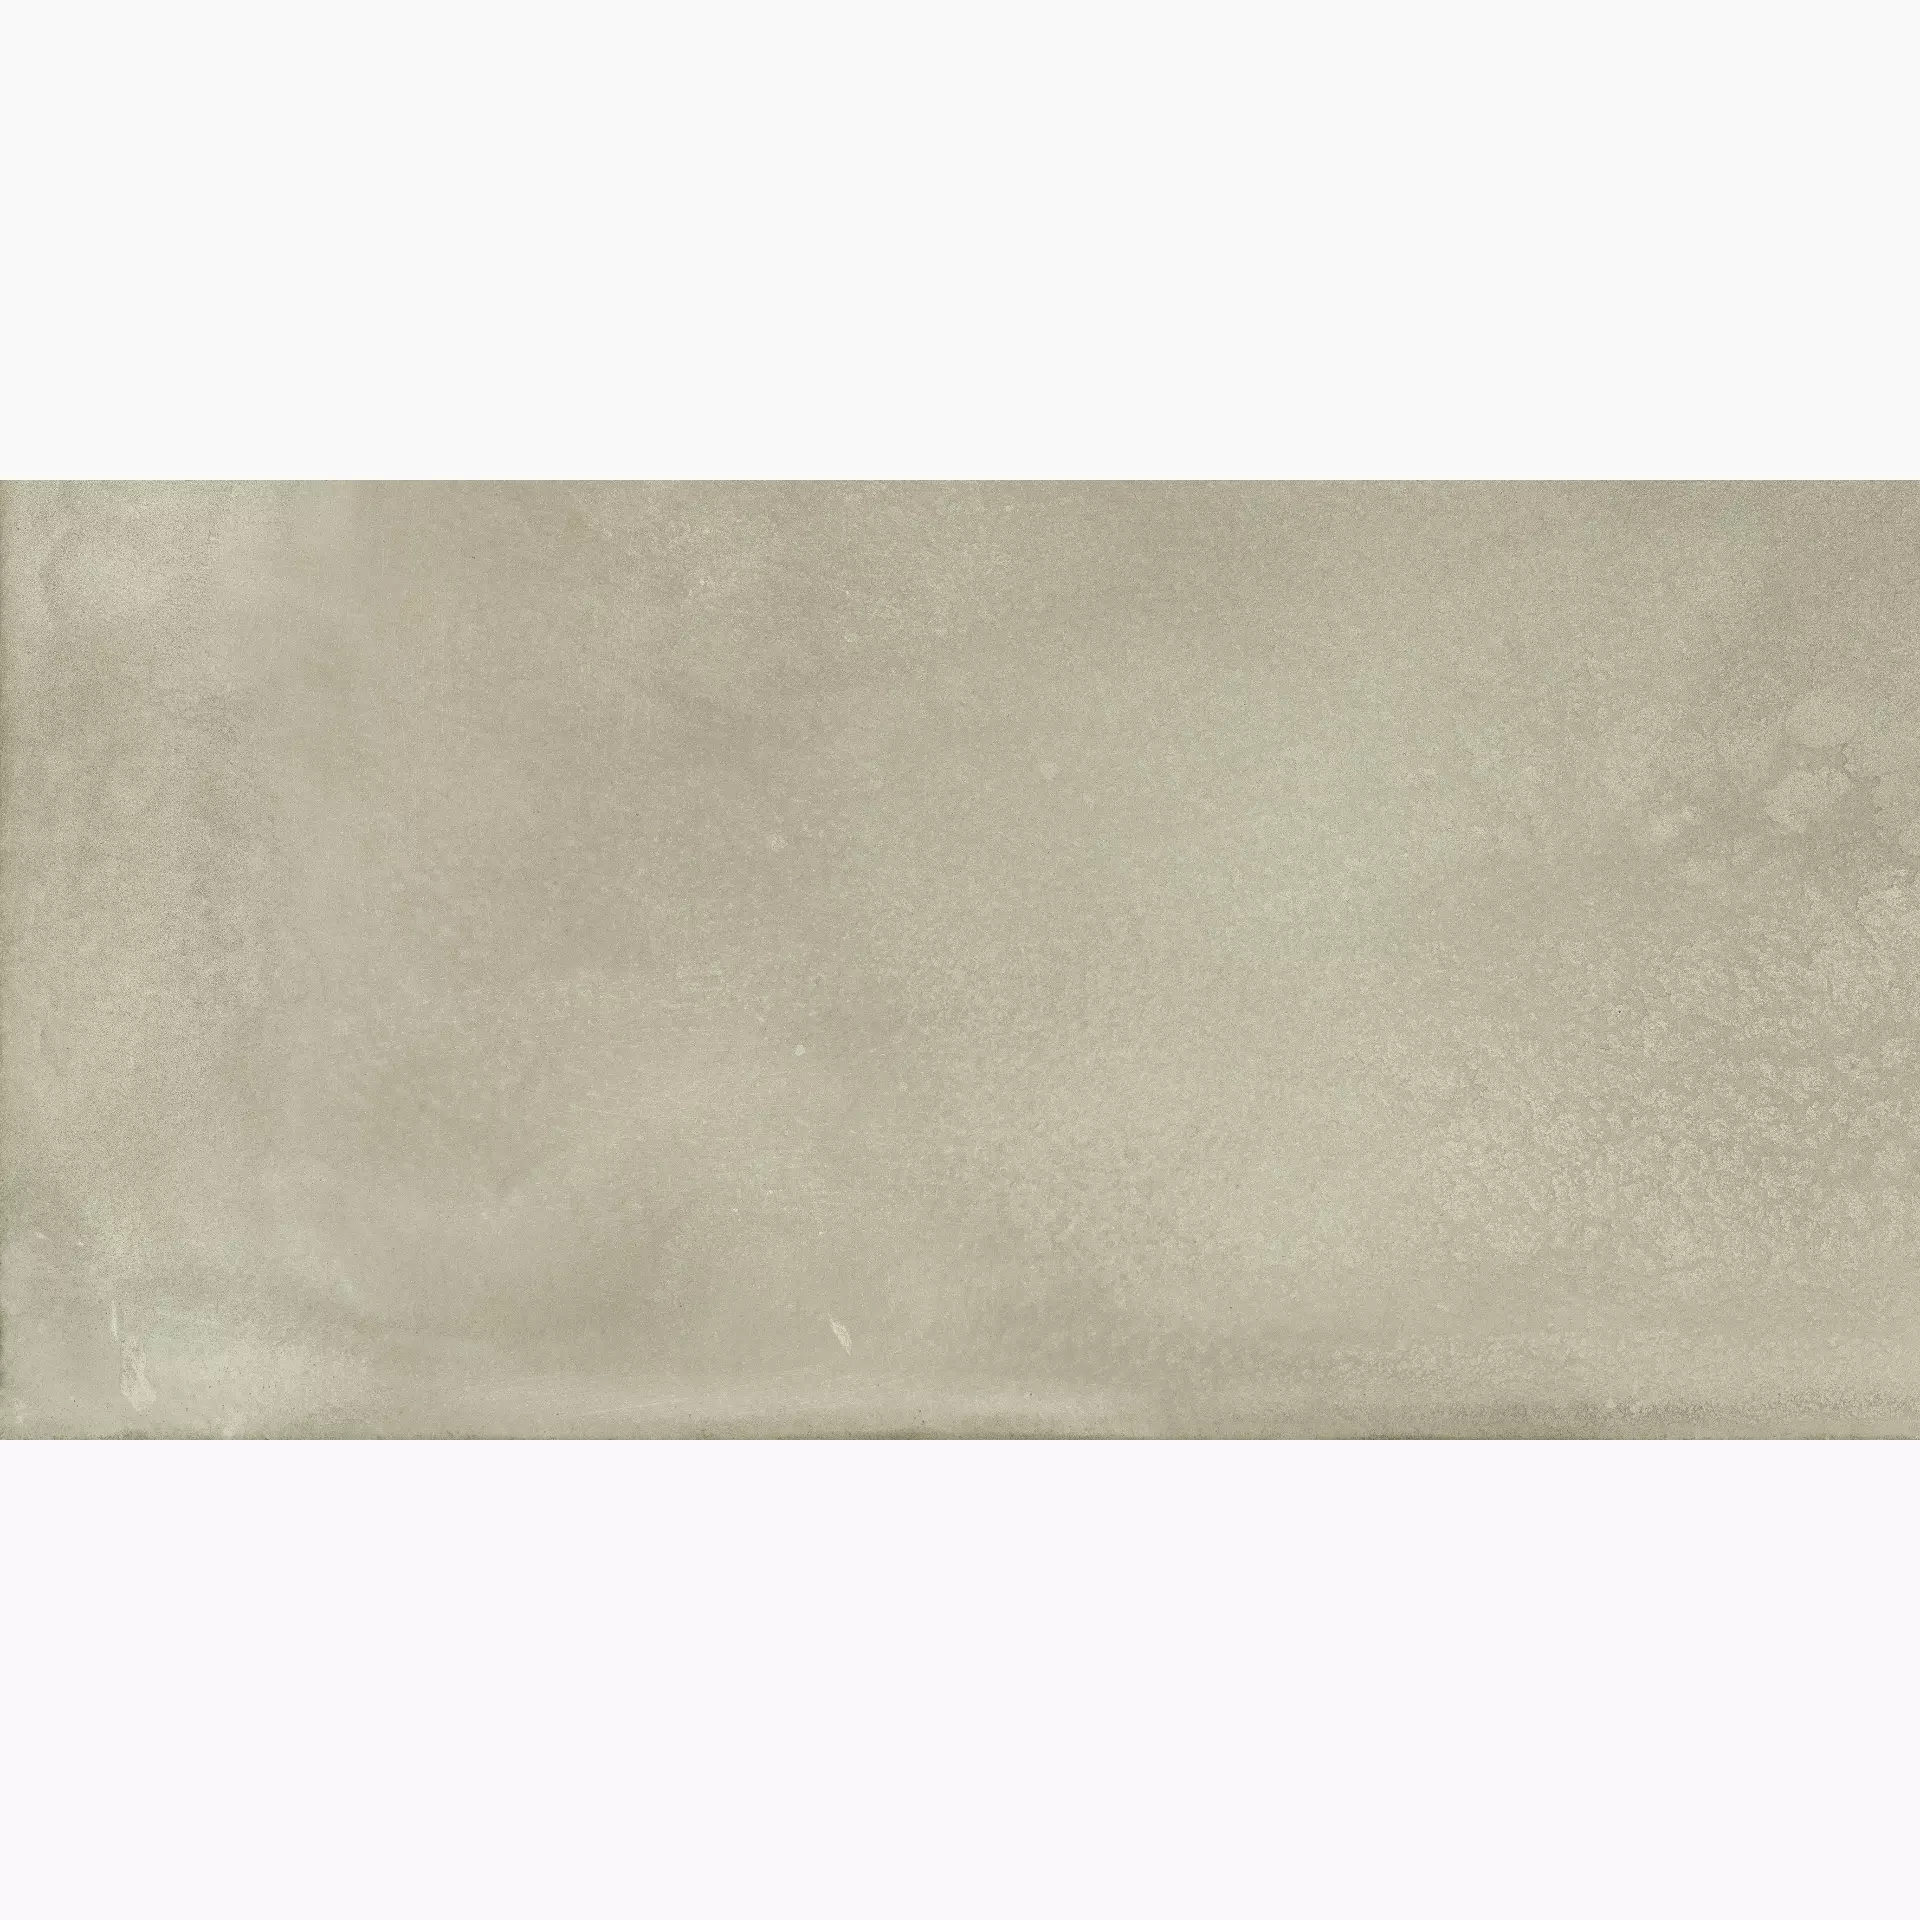 Ergon Tr3Nd Sand Naturale EC8T 60x120cm rectified 9,5mm